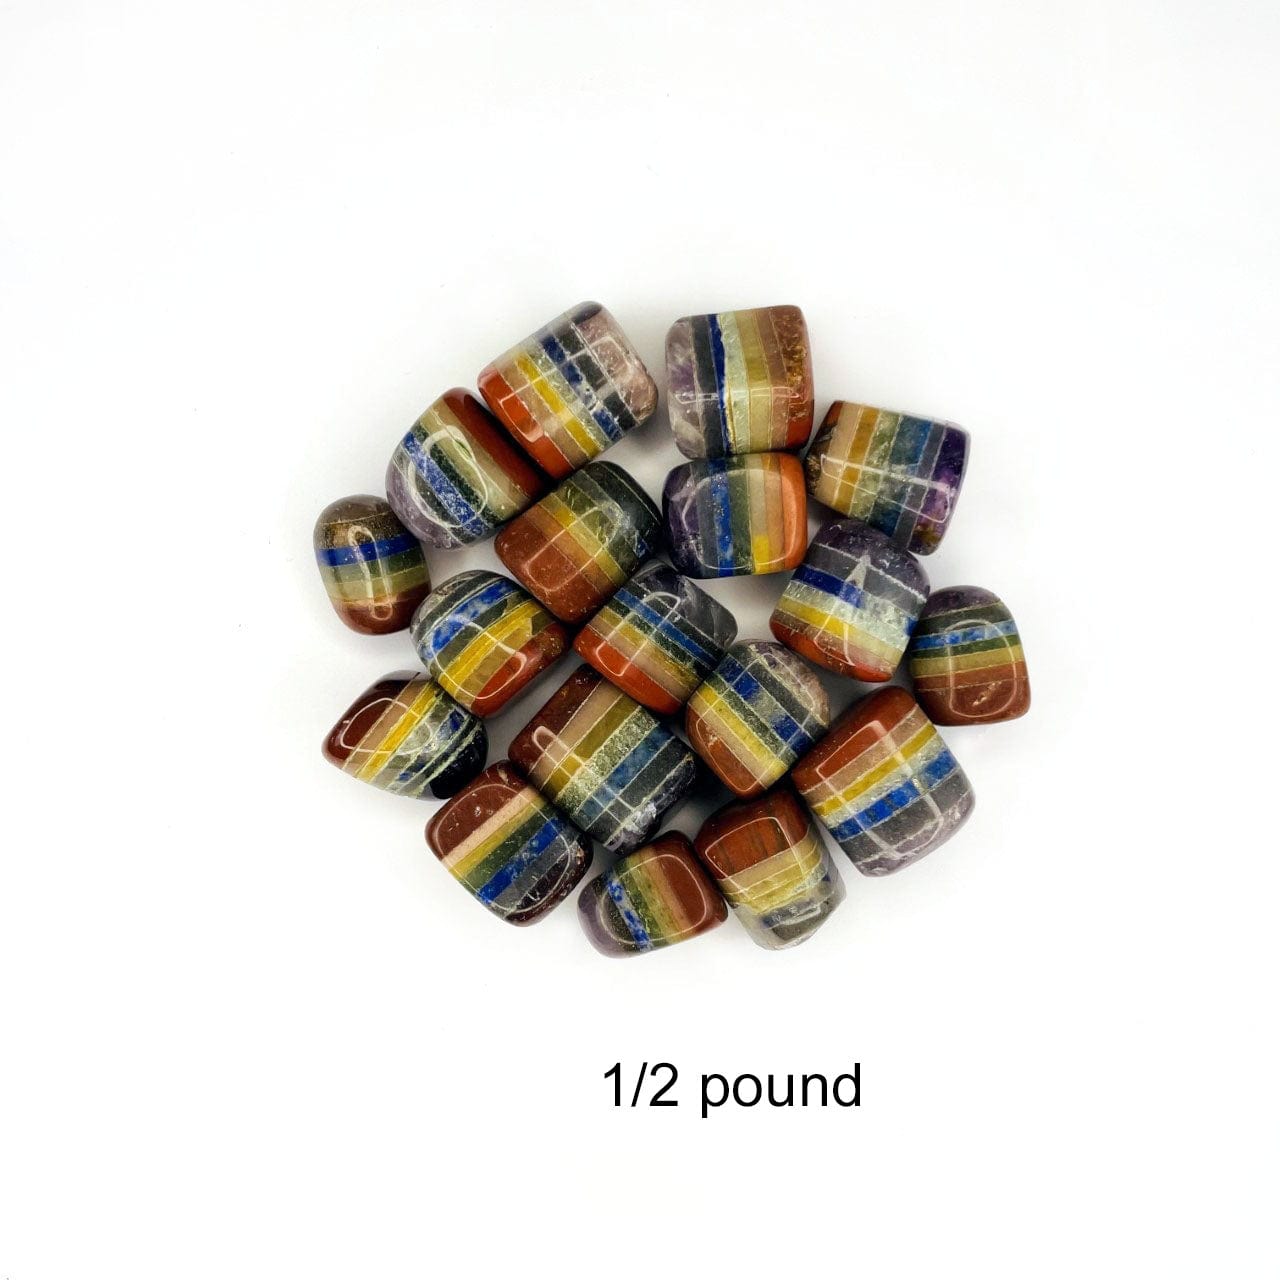 Bonded 7 chakra Stones  in a pile showing 1/2 pound of approximately 18 stones